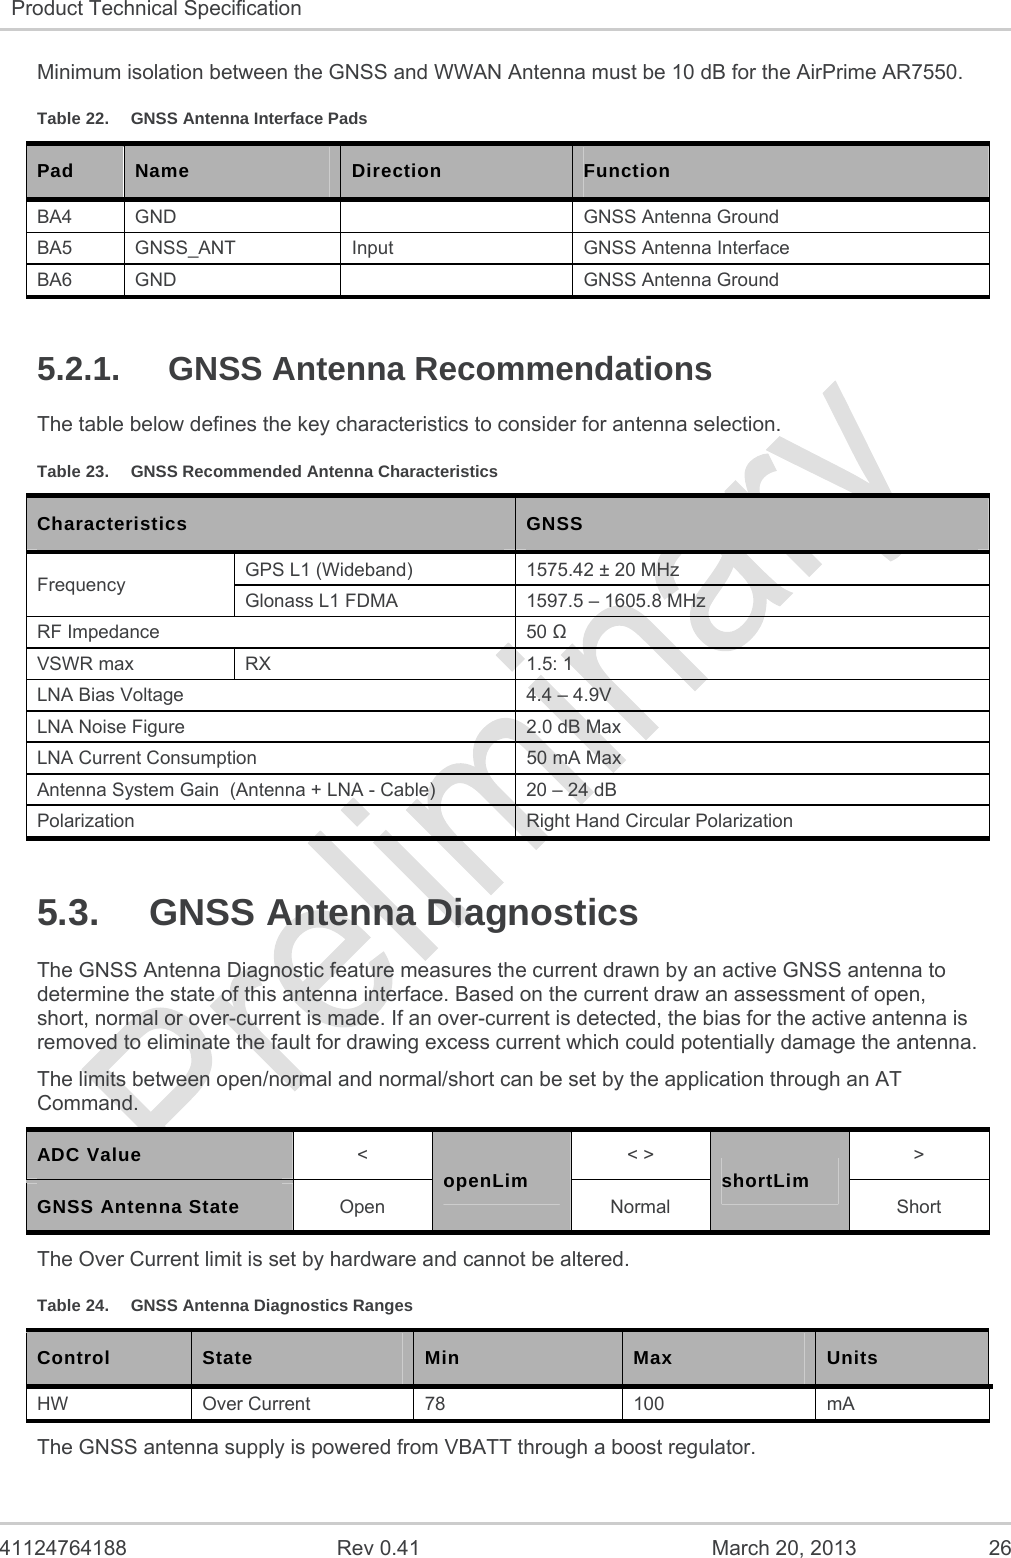   41124764188  Rev 0.41  March 20, 2013  26 Product Technical Specification   Minimum isolation between the GNSS and WWAN Antenna must be 10 dB for the AirPrime AR7550. Table 22.  GNSS Antenna Interface Pads Pad  Name  Direction  Function BA4  GND    GNSS Antenna Ground BA5  GNSS_ANT  Input  GNSS Antenna Interface BA6  GND    GNSS Antenna Ground 5.2.1. GNSS Antenna Recommendations The table below defines the key characteristics to consider for antenna selection. Table 23.  GNSS Recommended Antenna Characteristics Characteristics  GNSS Frequency  GPS L1 (Wideband)  1575.42 ± 20 MHz Glonass L1 FDMA  1597.5 – 1605.8 MHz RF Impedance  50  VSWR max  RX  1.5: 1 LNA Bias Voltage  4.4 – 4.9V LNA Noise Figure  2.0 dB Max LNA Current Consumption  50 mA Max Antenna System Gain  (Antenna + LNA - Cable)  20 – 24 dB Polarization  Right Hand Circular Polarization 5.3. GNSS Antenna Diagnostics The GNSS Antenna Diagnostic feature measures the current drawn by an active GNSS antenna to determine the state of this antenna interface. Based on the current draw an assessment of open, short, normal or over-current is made. If an over-current is detected, the bias for the active antenna is removed to eliminate the fault for drawing excess current which could potentially damage the antenna. The limits between open/normal and normal/short can be set by the application through an AT Command. ADC Value &lt; openLim &lt; &gt; shortLim &gt; GNSS Antenna State Open Normal Short The Over Current limit is set by hardware and cannot be altered. Table 24.  GNSS Antenna Diagnostics Ranges Control  State  Min  Max  Units HW Over Current 78  100  mA The GNSS antenna supply is powered from VBATT through a boost regulator. 